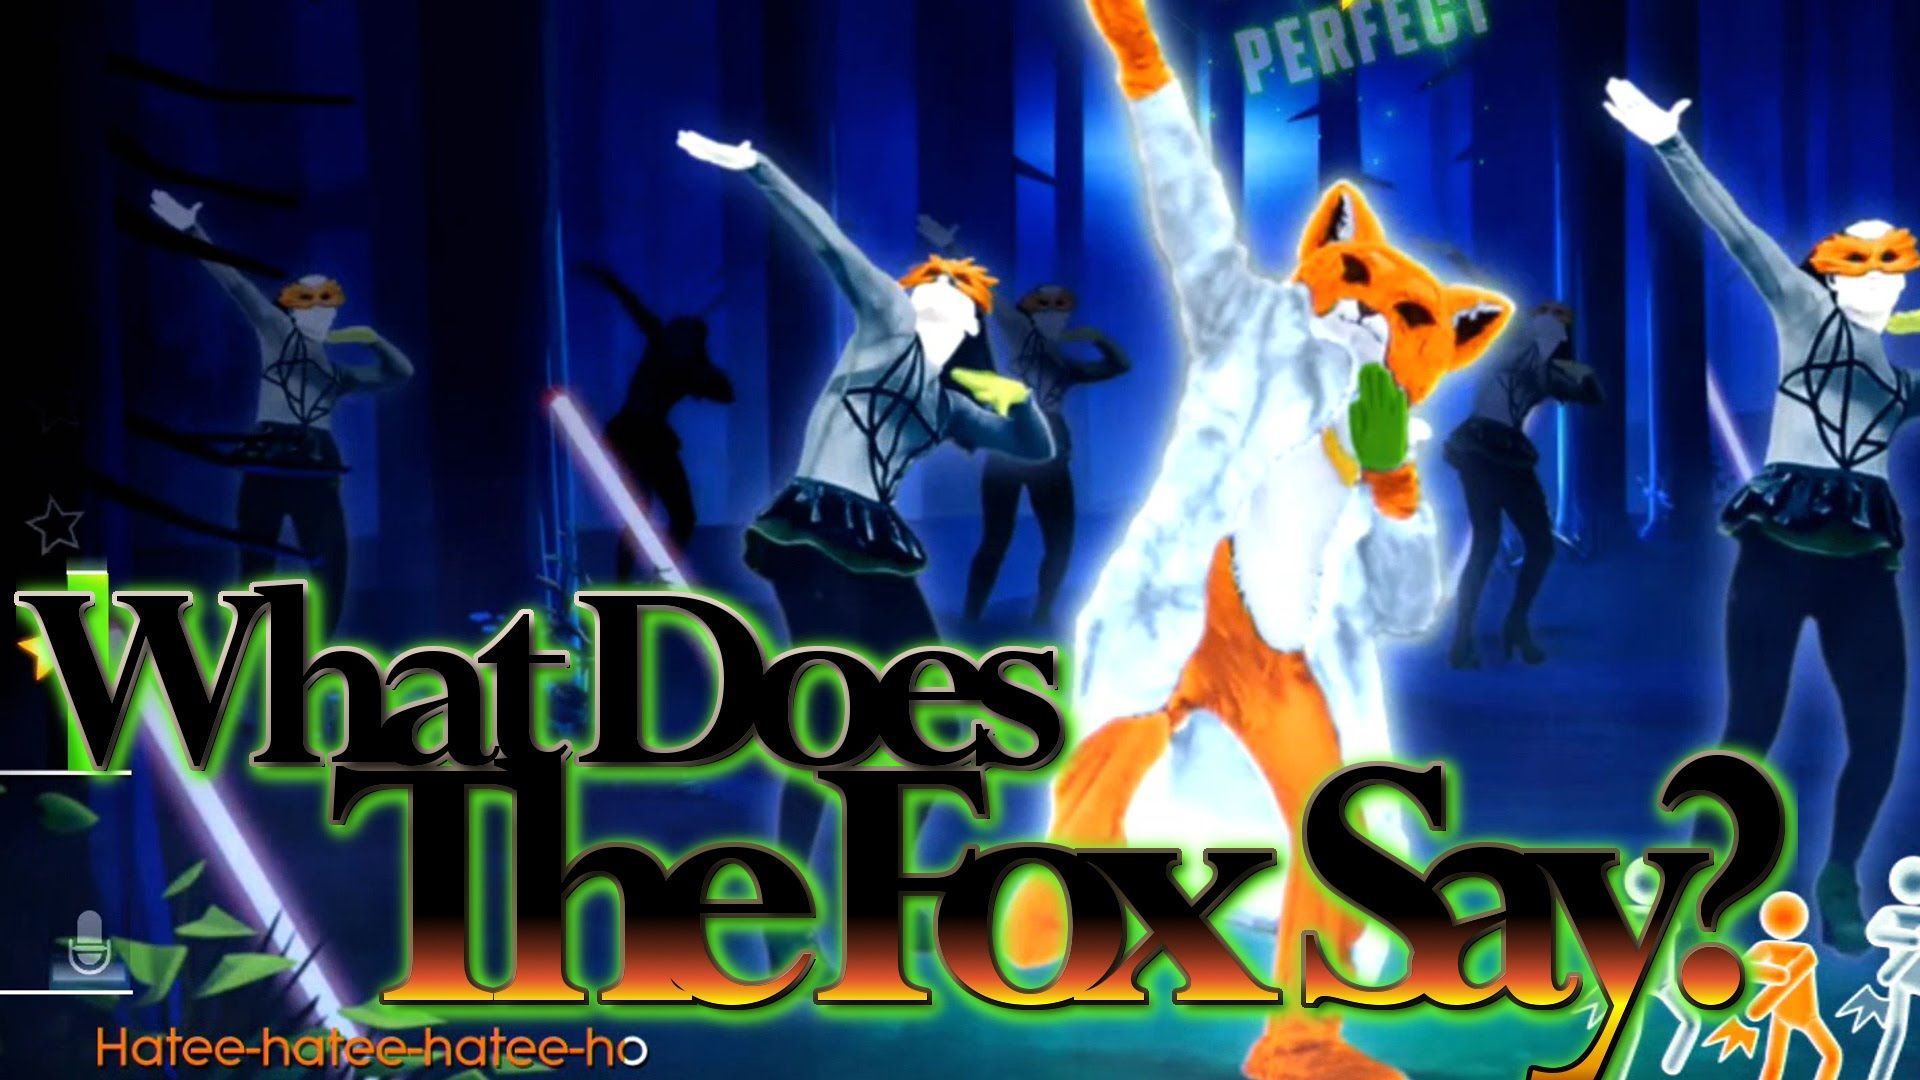 Just Dance 2015. The Fox (What Does The Fox Say?)